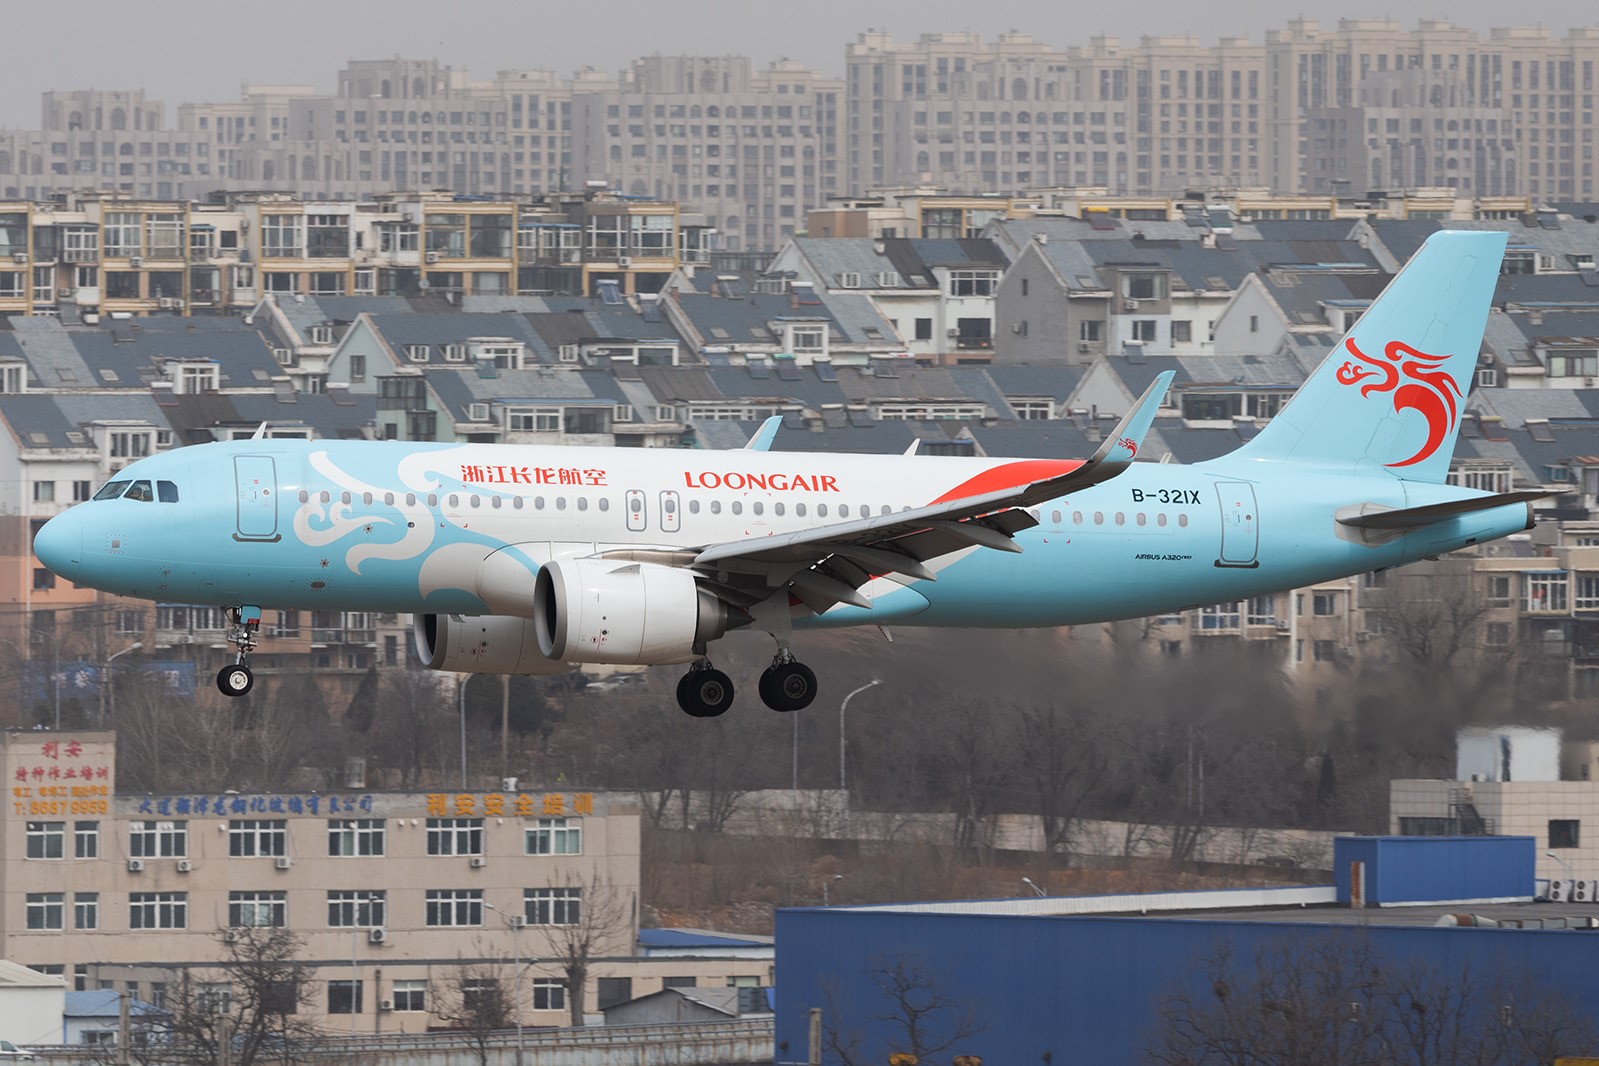 Int’l flights to Uzbekistan resumed in SW China’s Sichuan; 2nd Dialogue of Cross-Border Cooperation between Kazakhstan and China is held in Almaty; President Tokayev reappoints Alikhan Smailov as Kazakh PM. /2.4.23